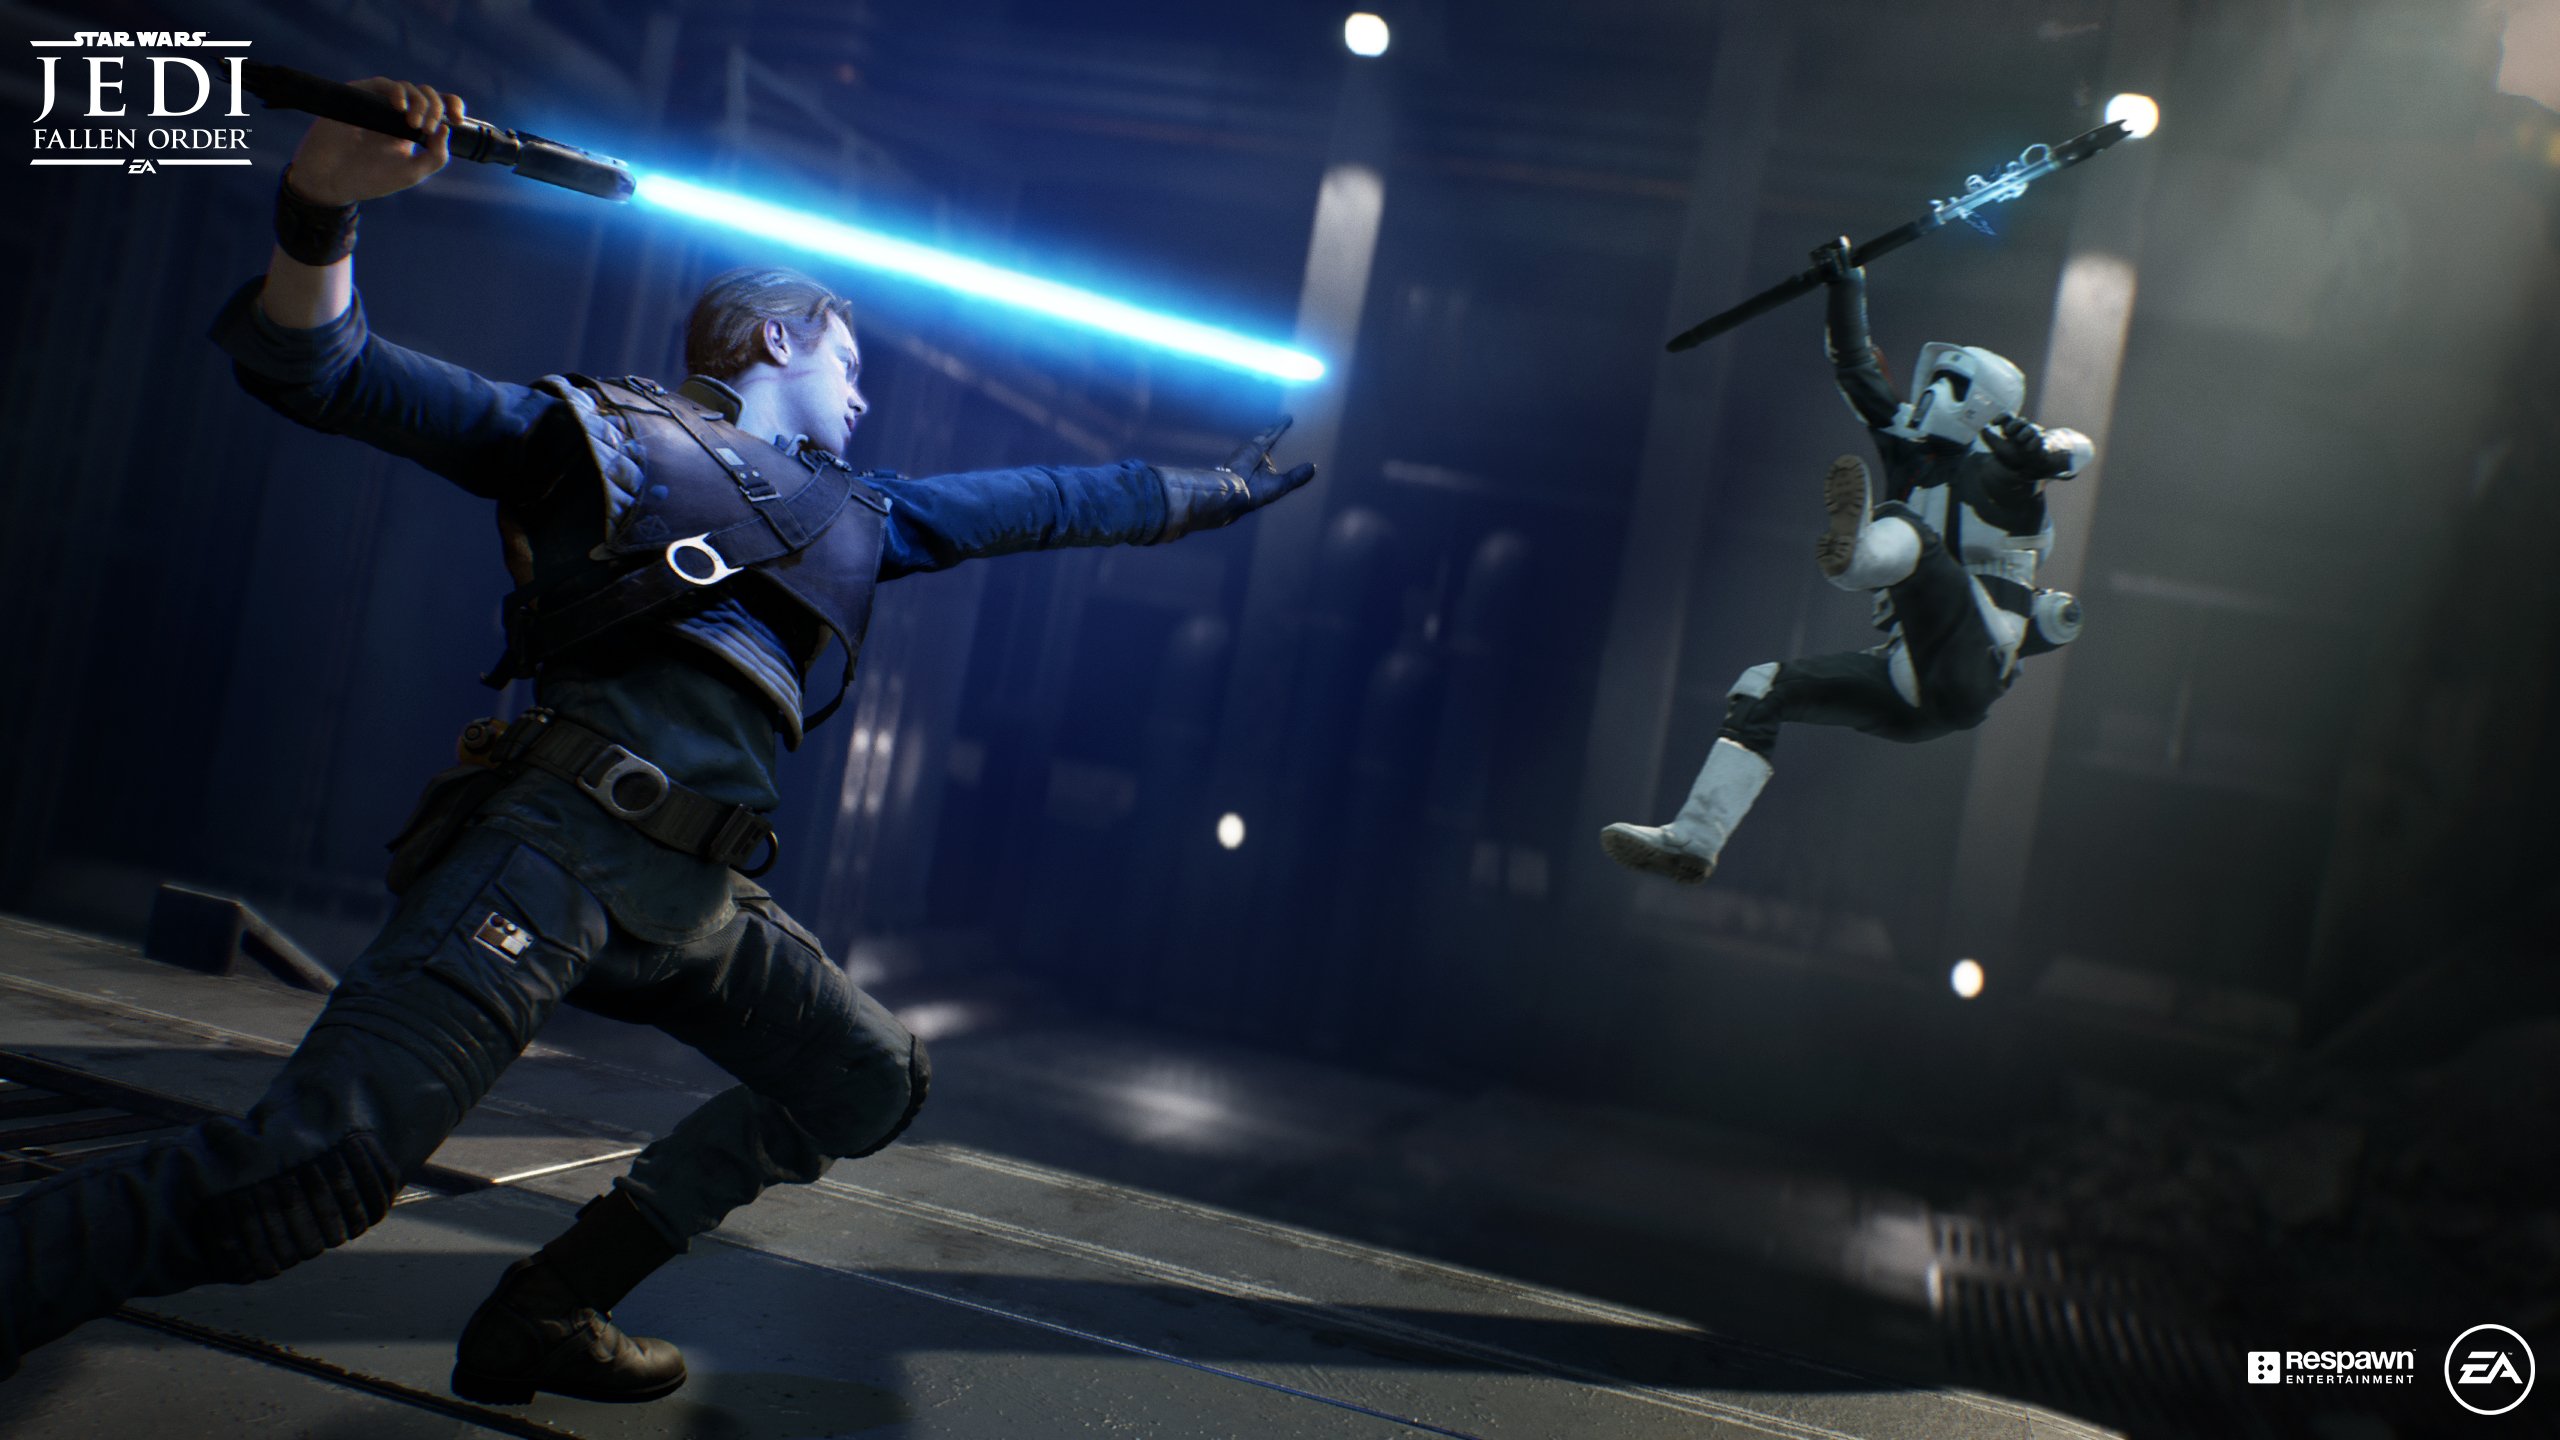 The 'Jedi' in Star Wars Jedi: Fallen Order acts a lot like a Sith